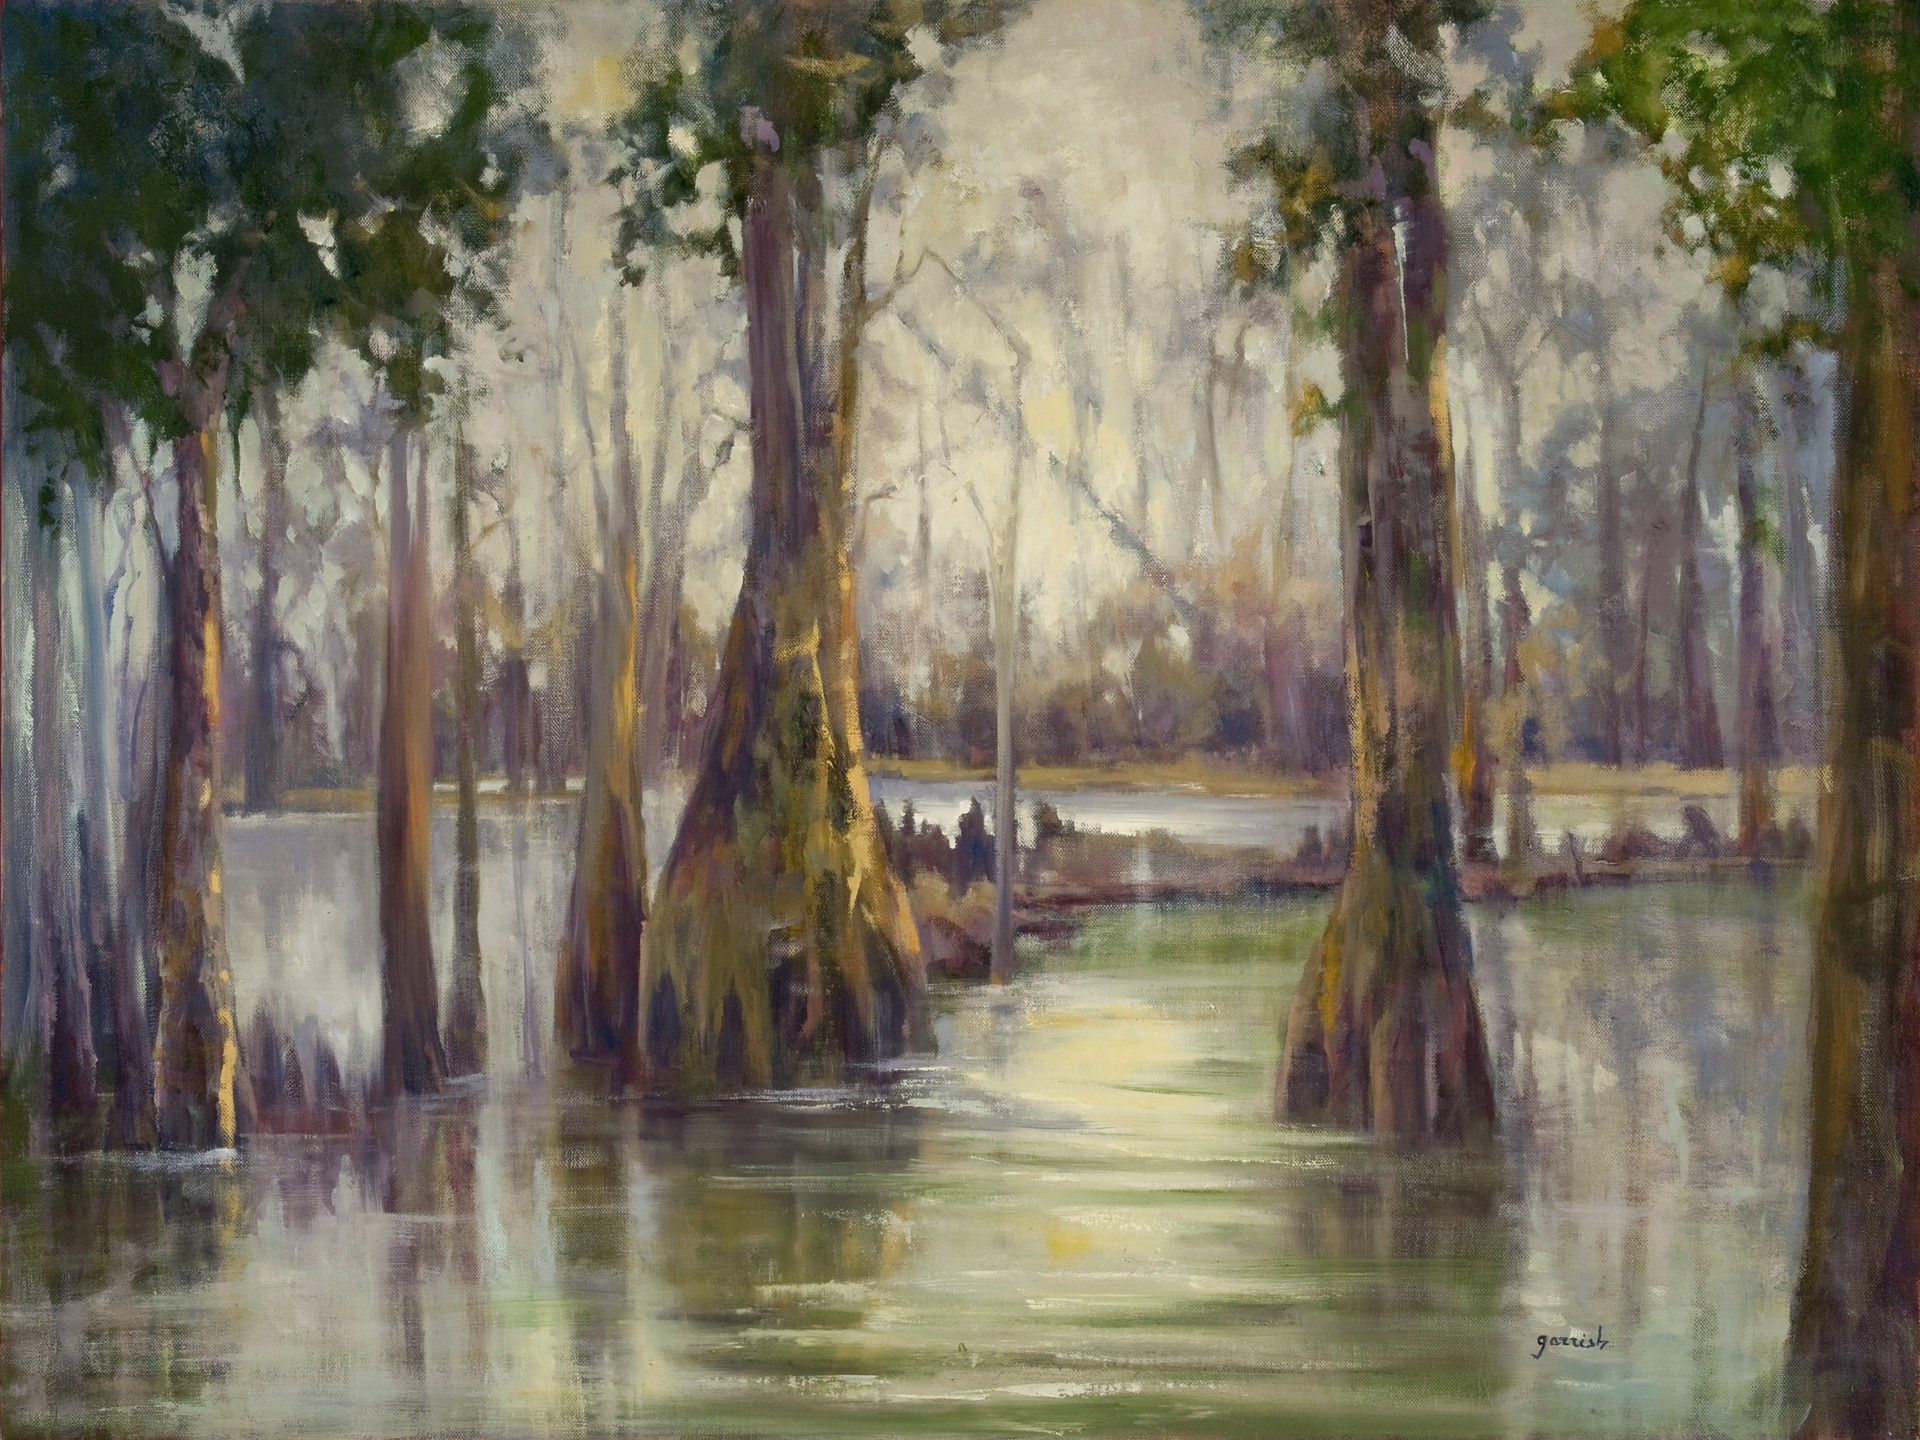 "Cypress Reflection" is an original oil painting by Mary Garrish